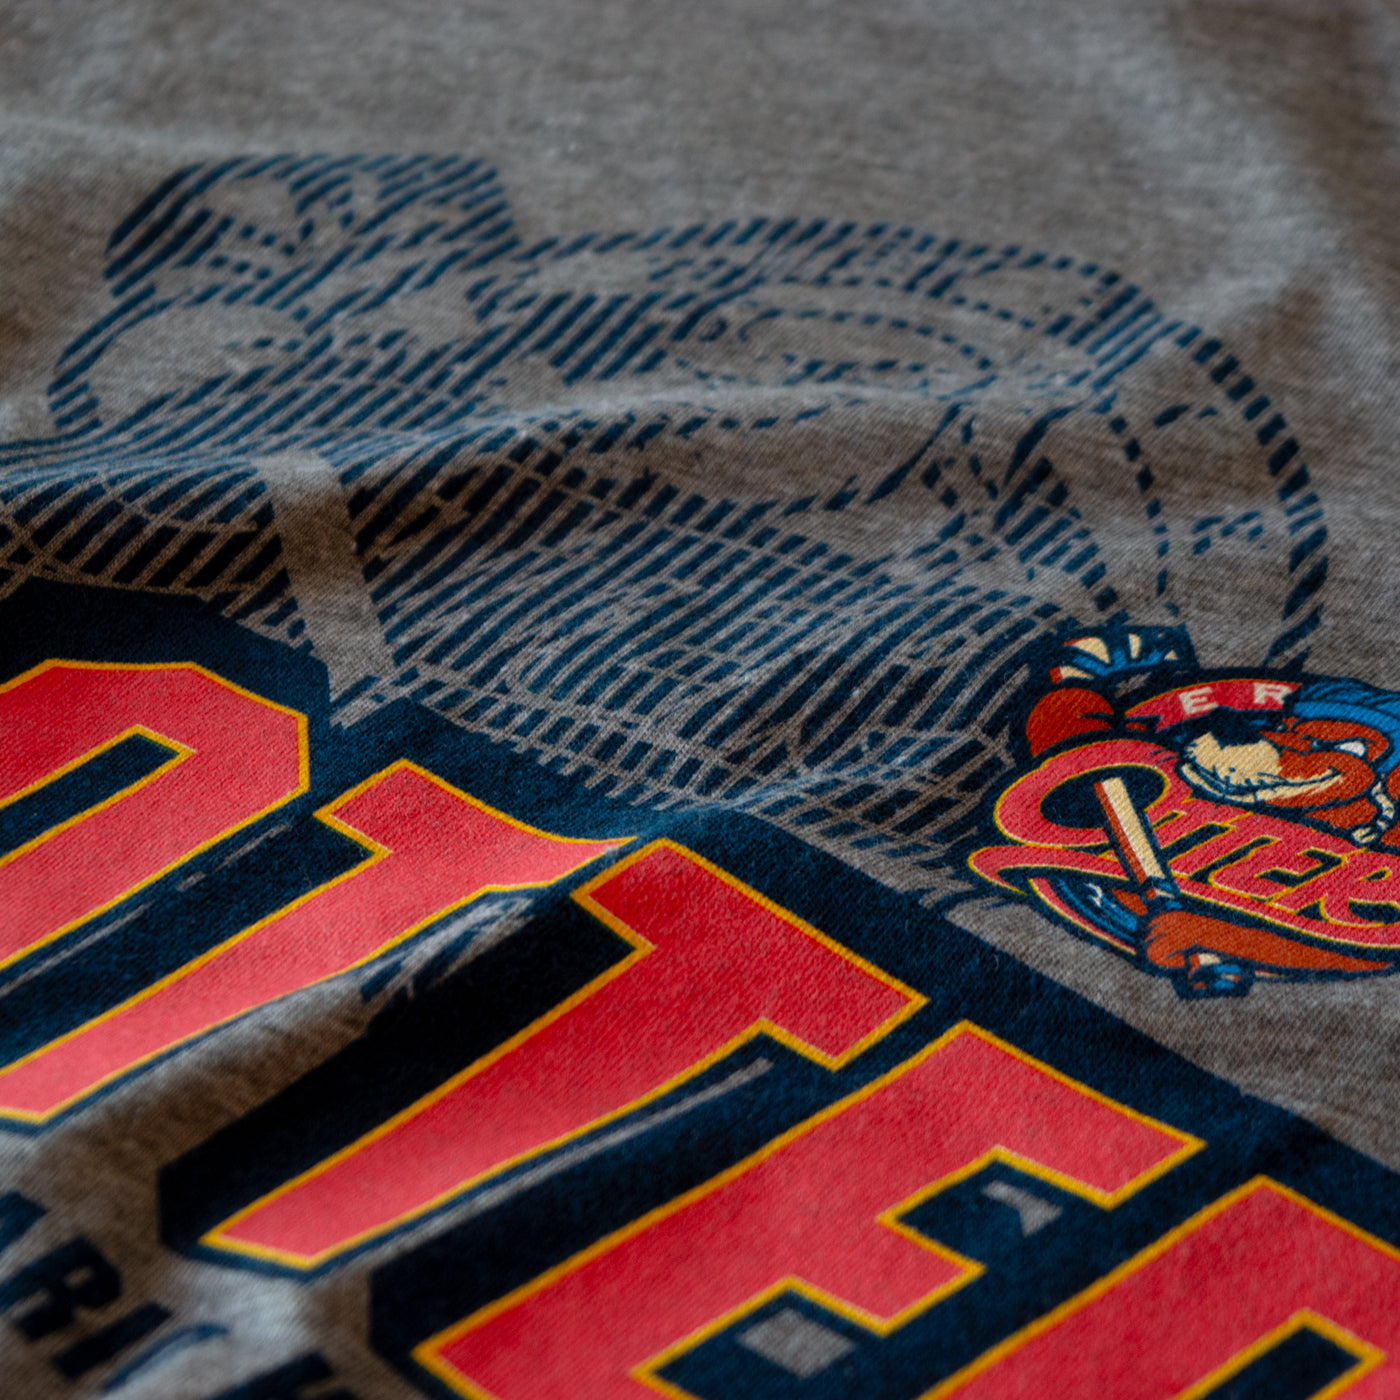 Erie Otters Throwback Tee - Heather Grey